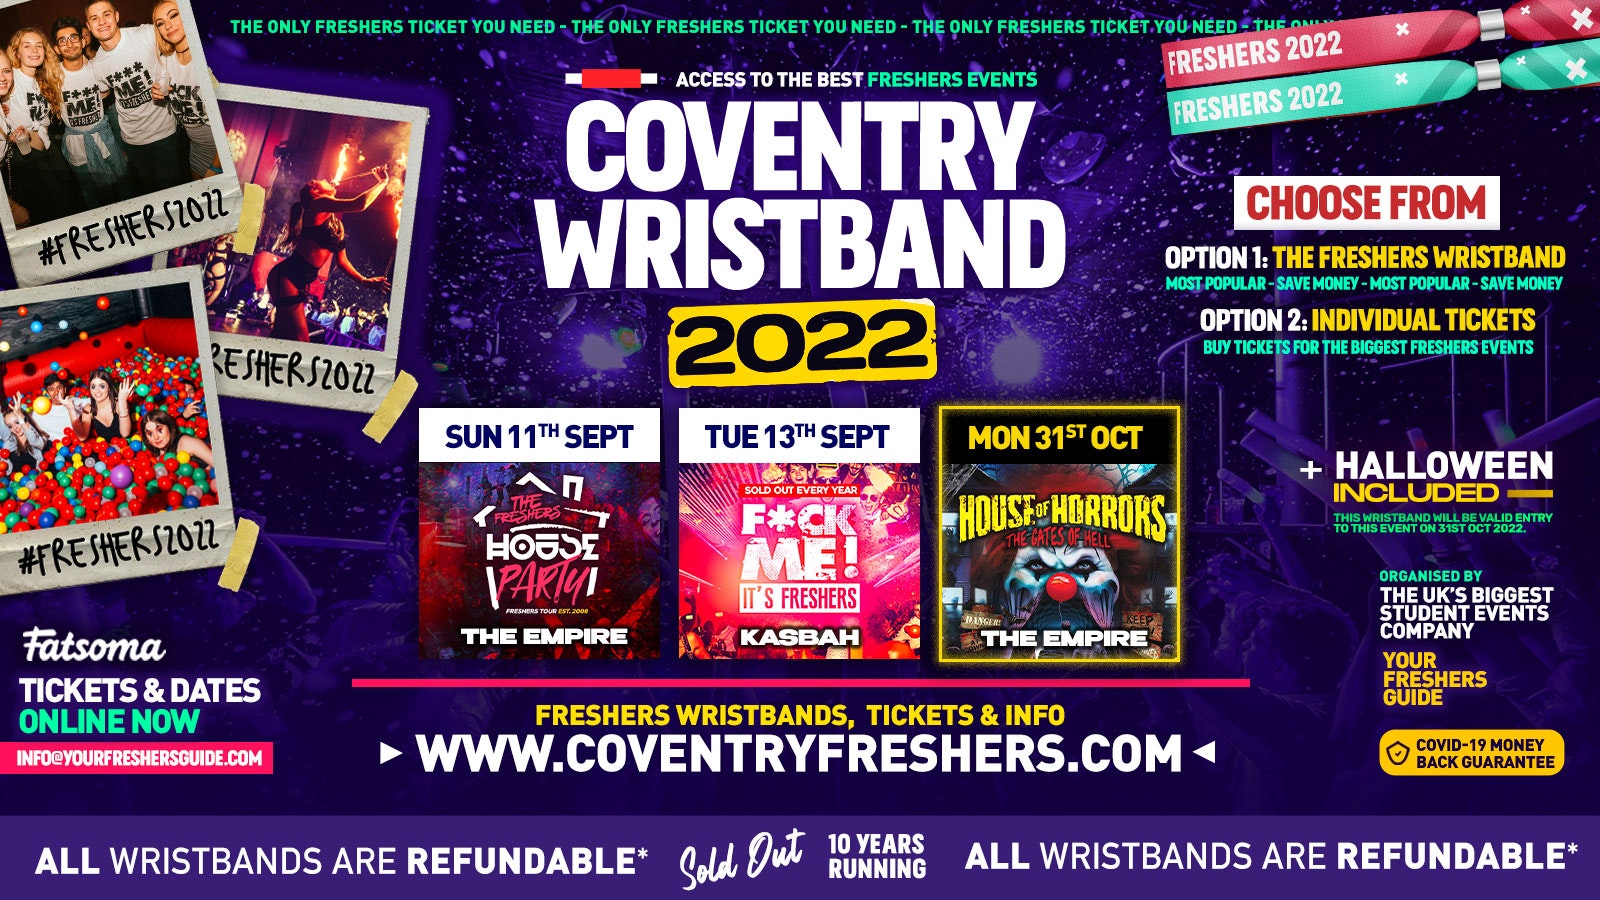 Coventry Freshers Wristband 2022 | Includes the BIGGEST events at The Empire & Kasbah – Coventry Freshers Week 2022 !